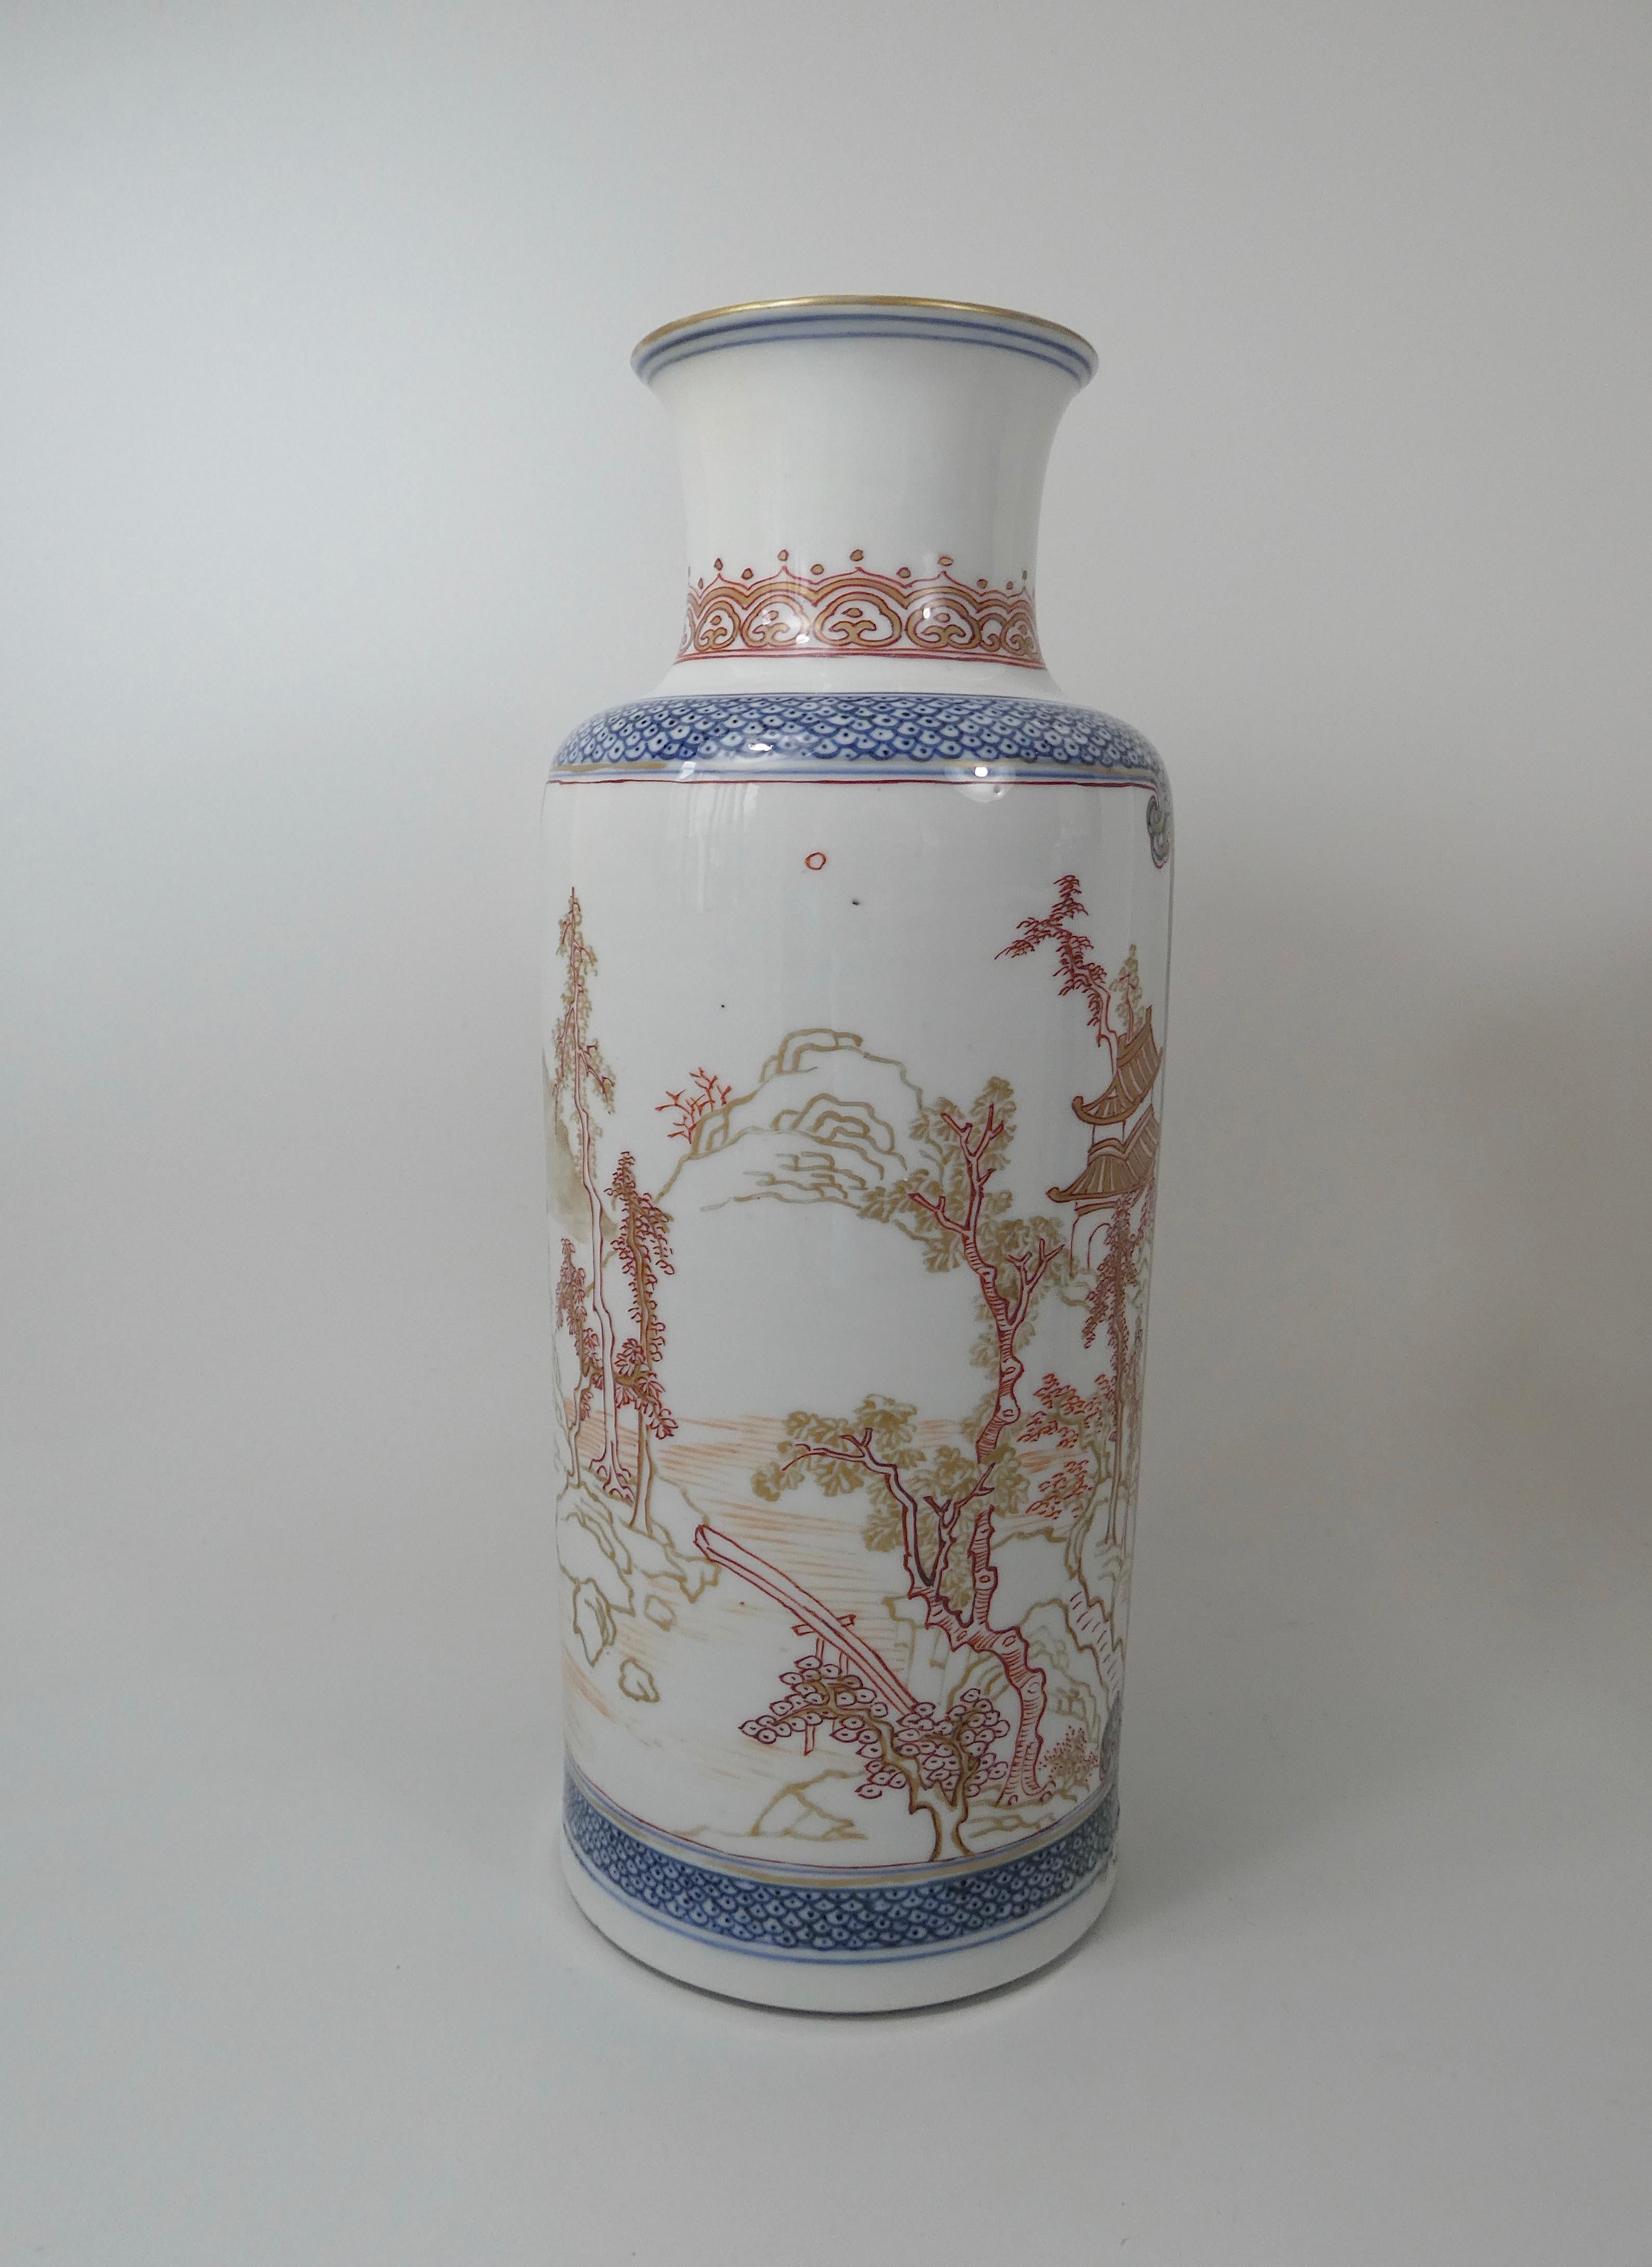 Pair of Chinese Porcelain ‘Rouge de Fer’ Decorated Vases, c. 1700. Kangxi. 2